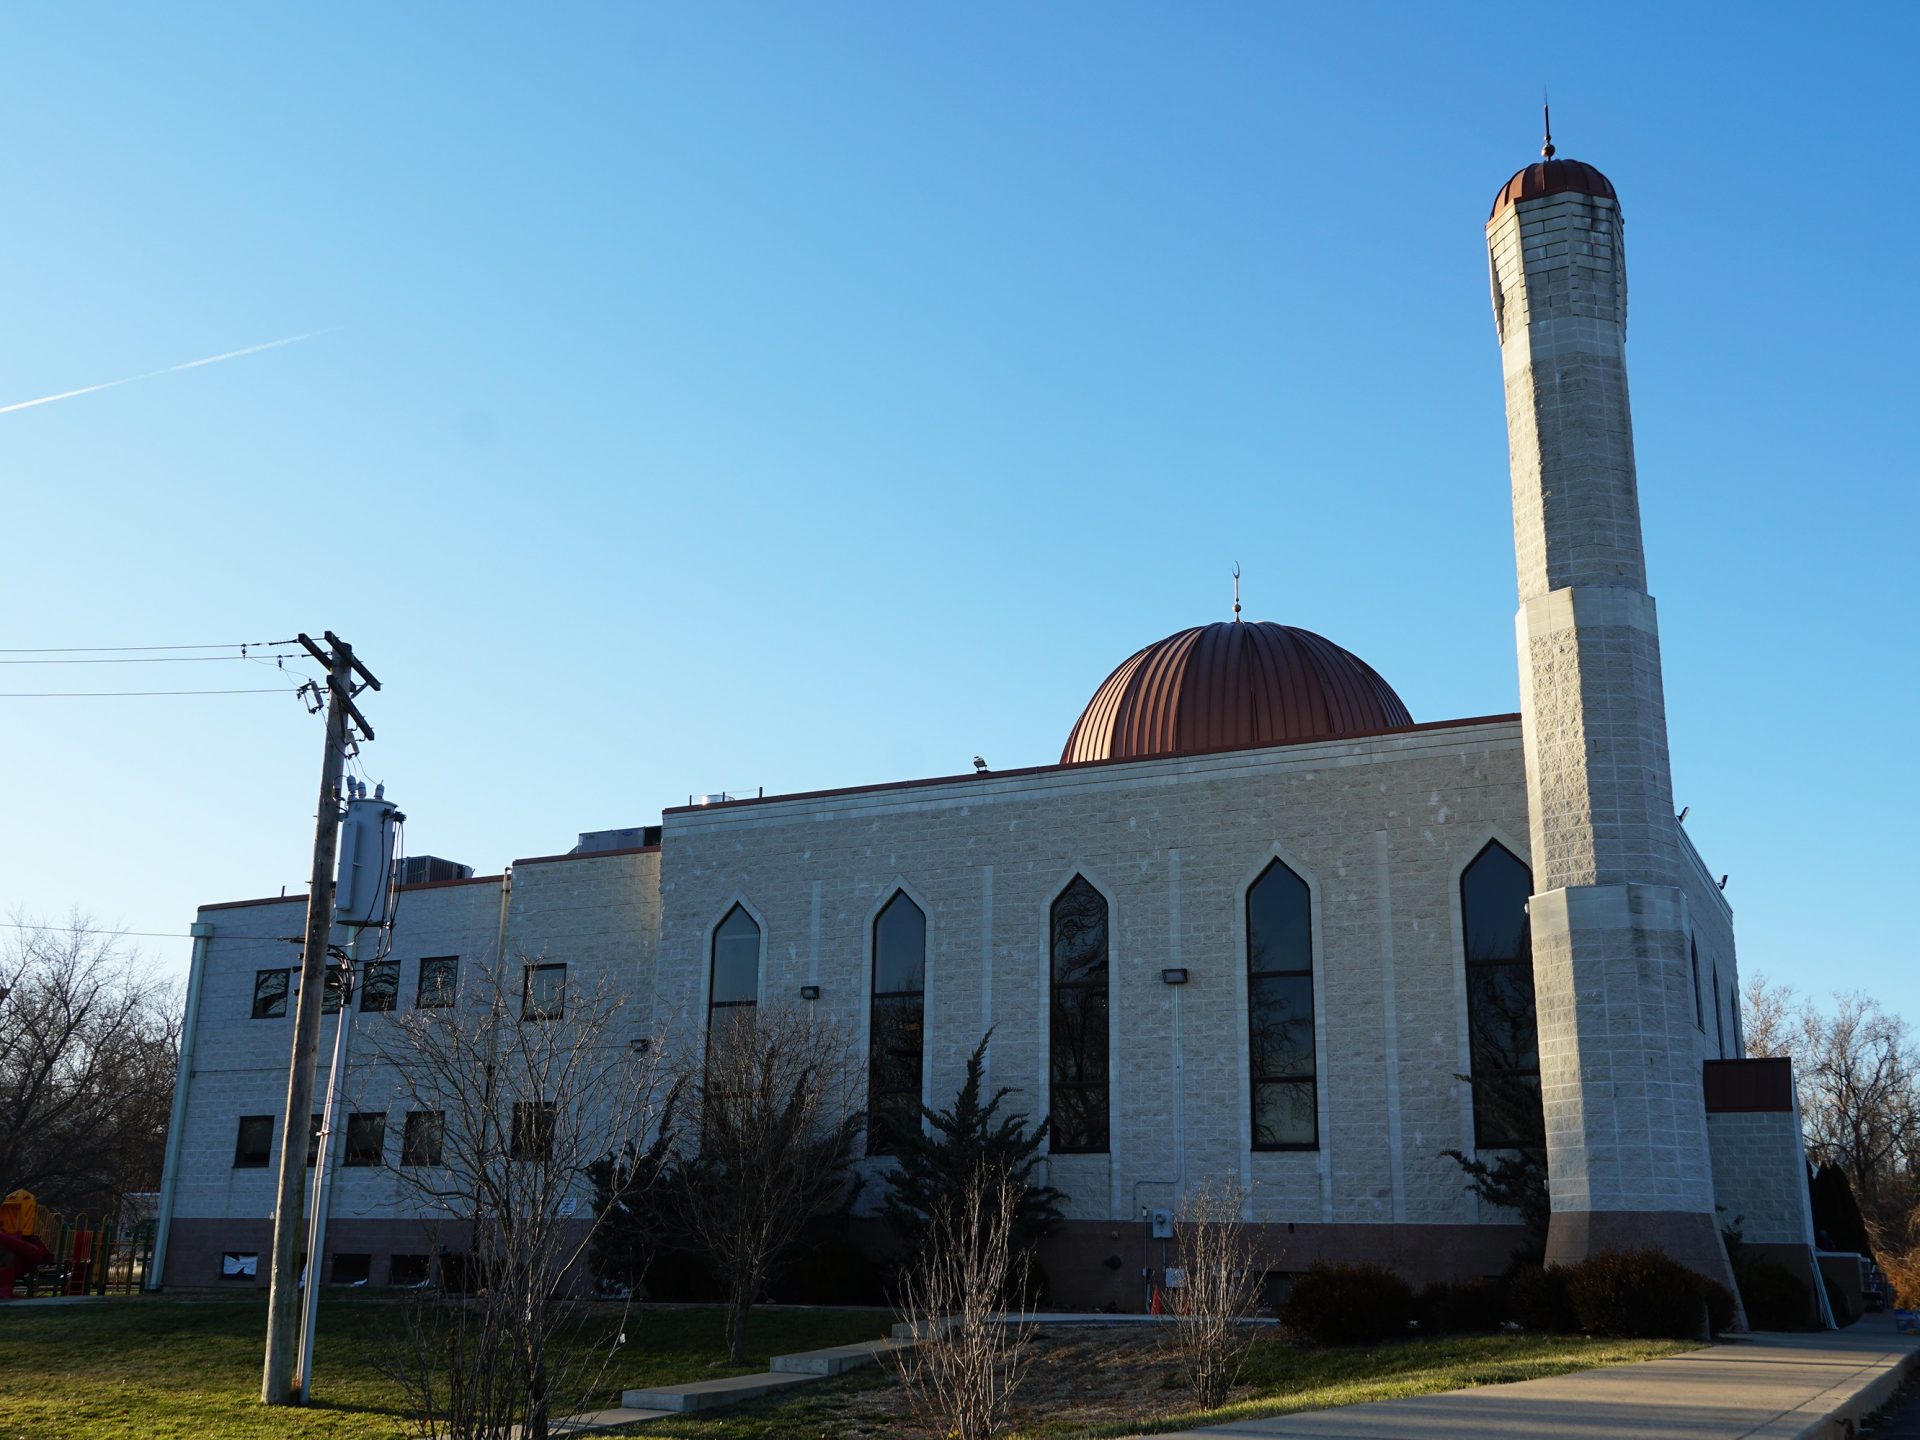 The Islamic Foundation of Greater St. Louis has strengthened its security following attacks on Muslim gatherings worldwide.